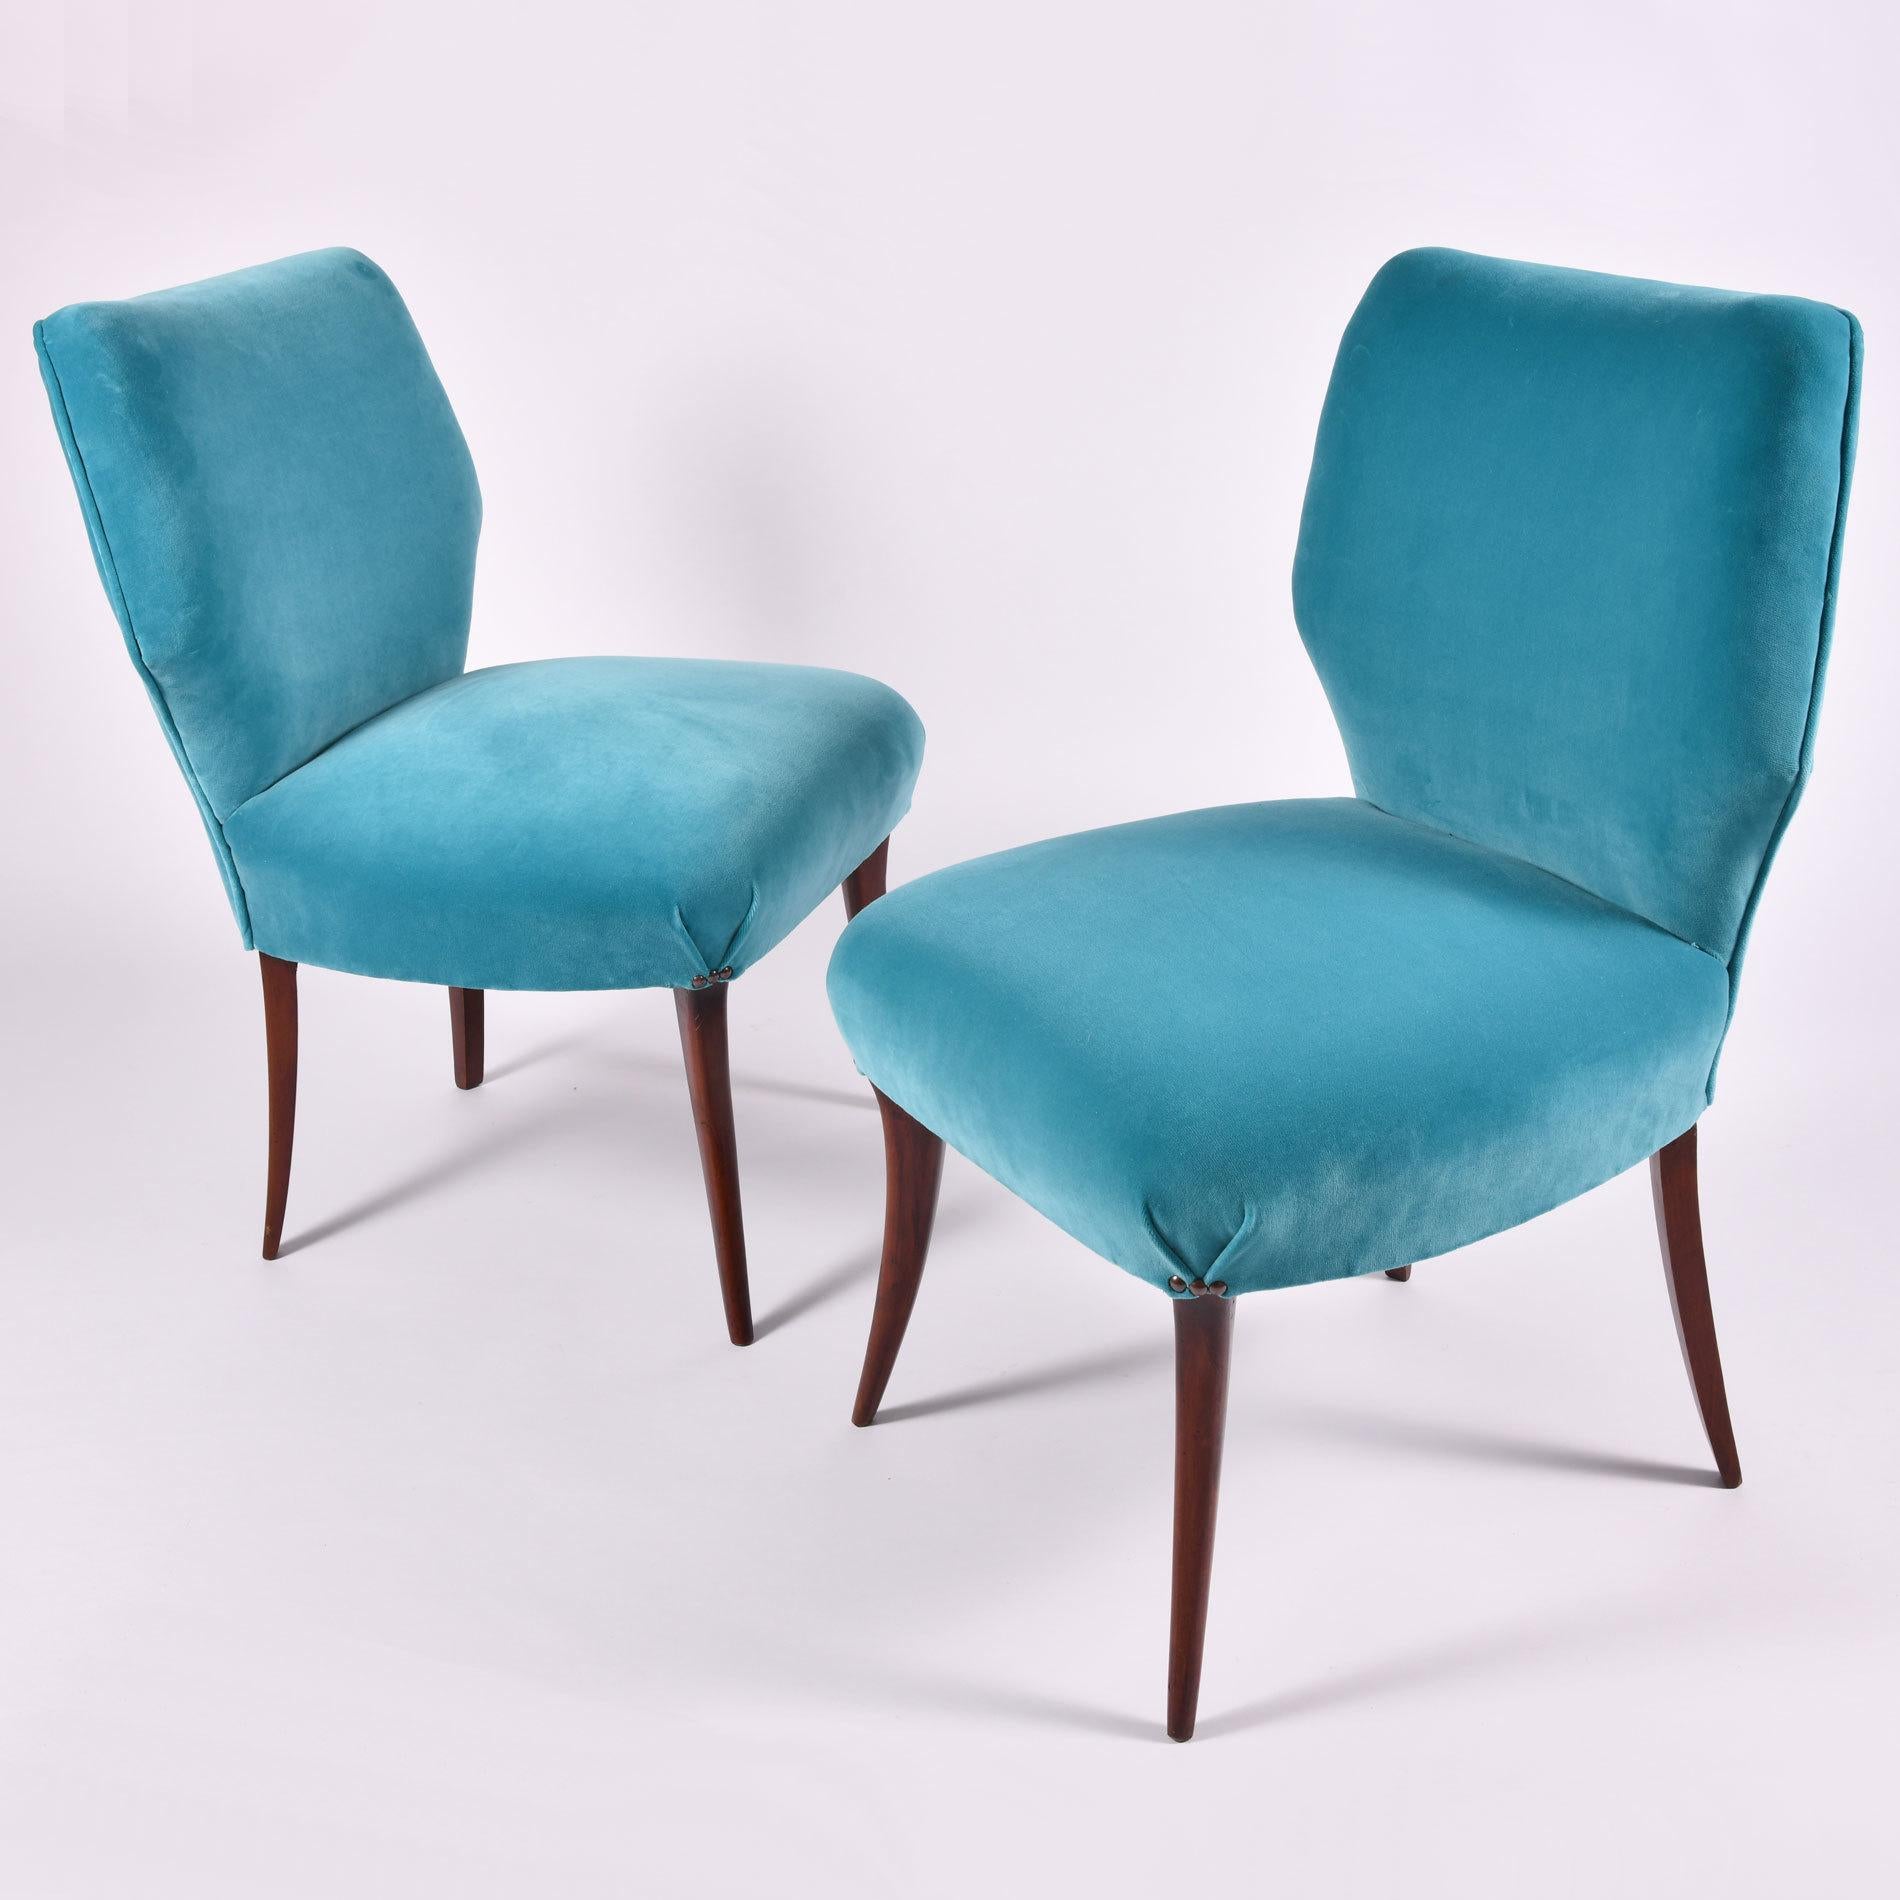 Mid-Century Modern pair of occasional chairs with dark wood tapered legs, re-upholstered in turquoise velvet.